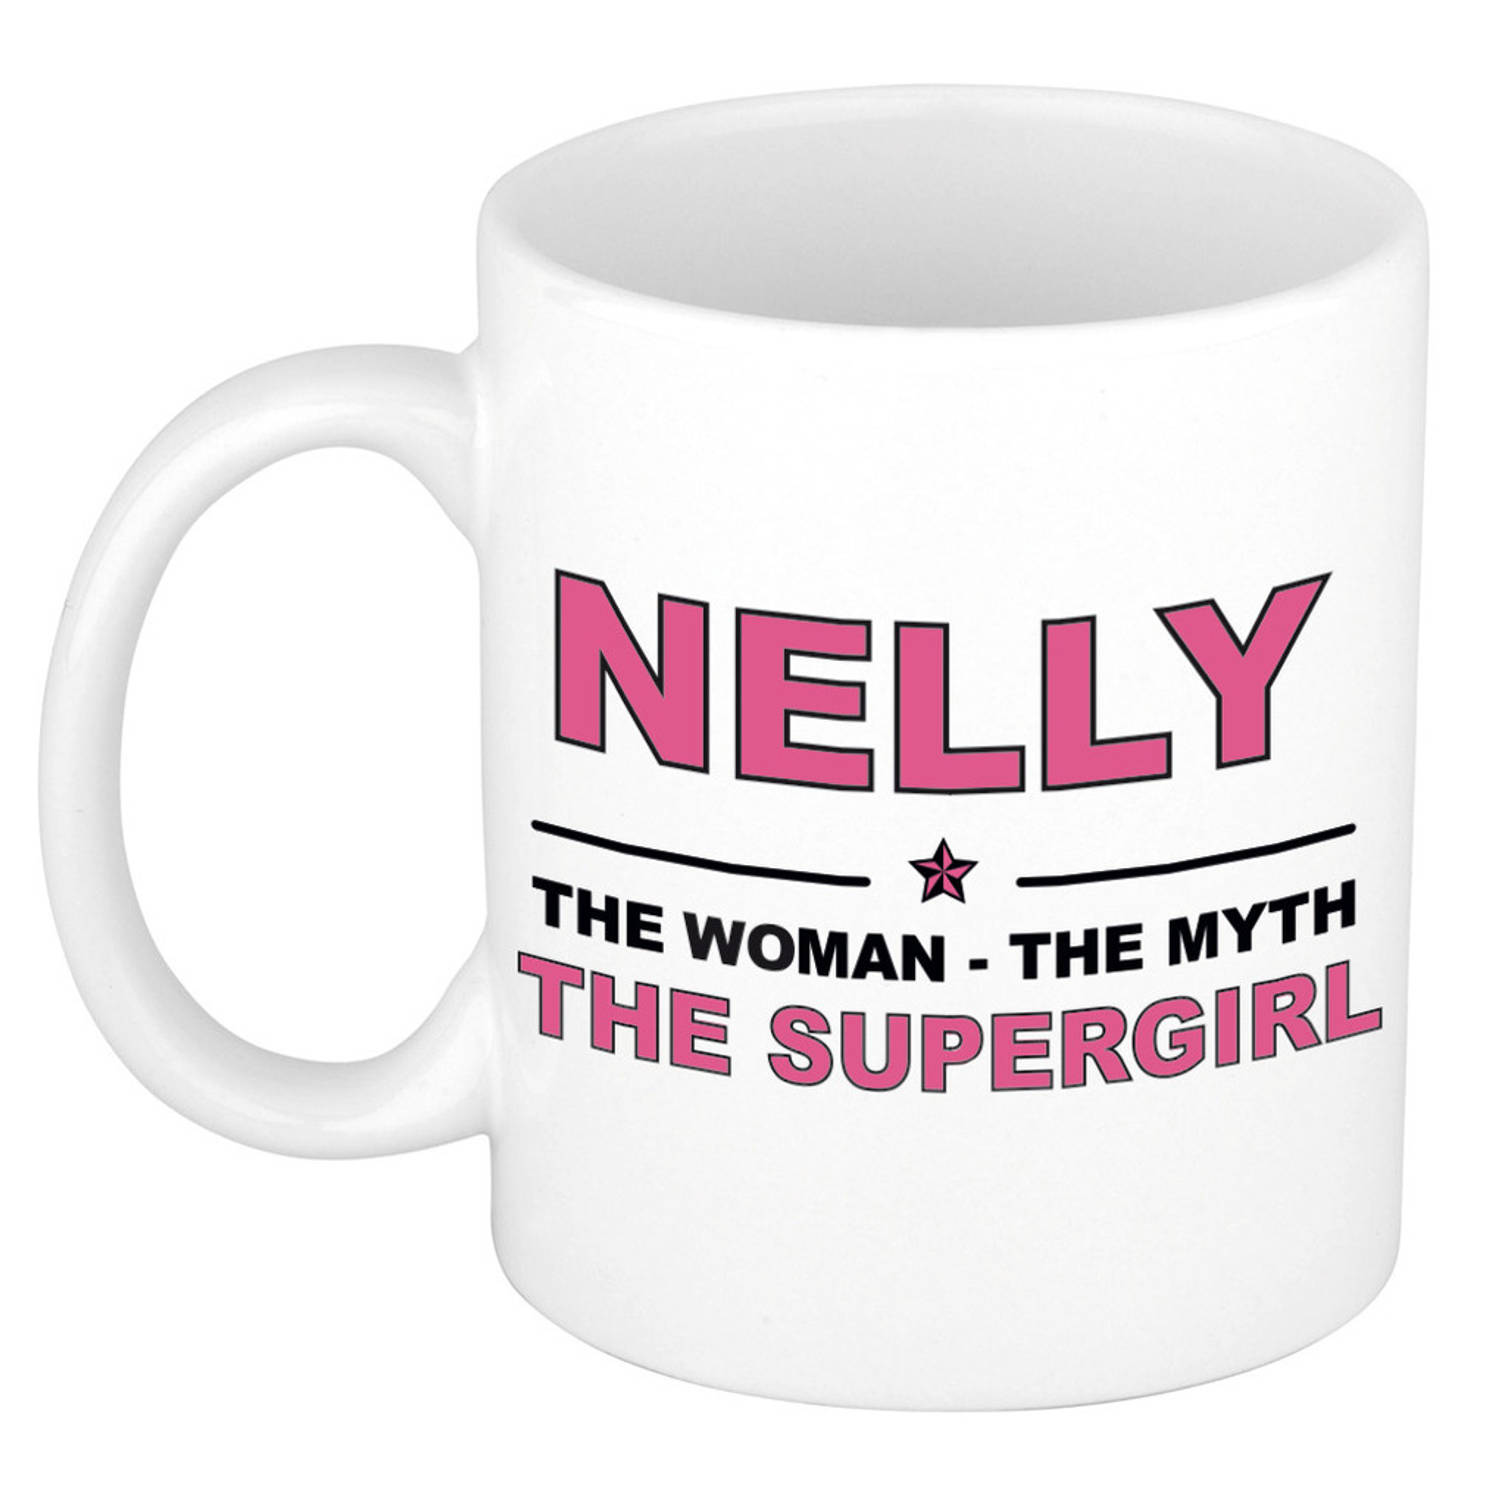 Nelly The Woman, The Myth The Supergirl Cadeau Koffie Mok-Thee Beker 300 Ml Naam Mokken